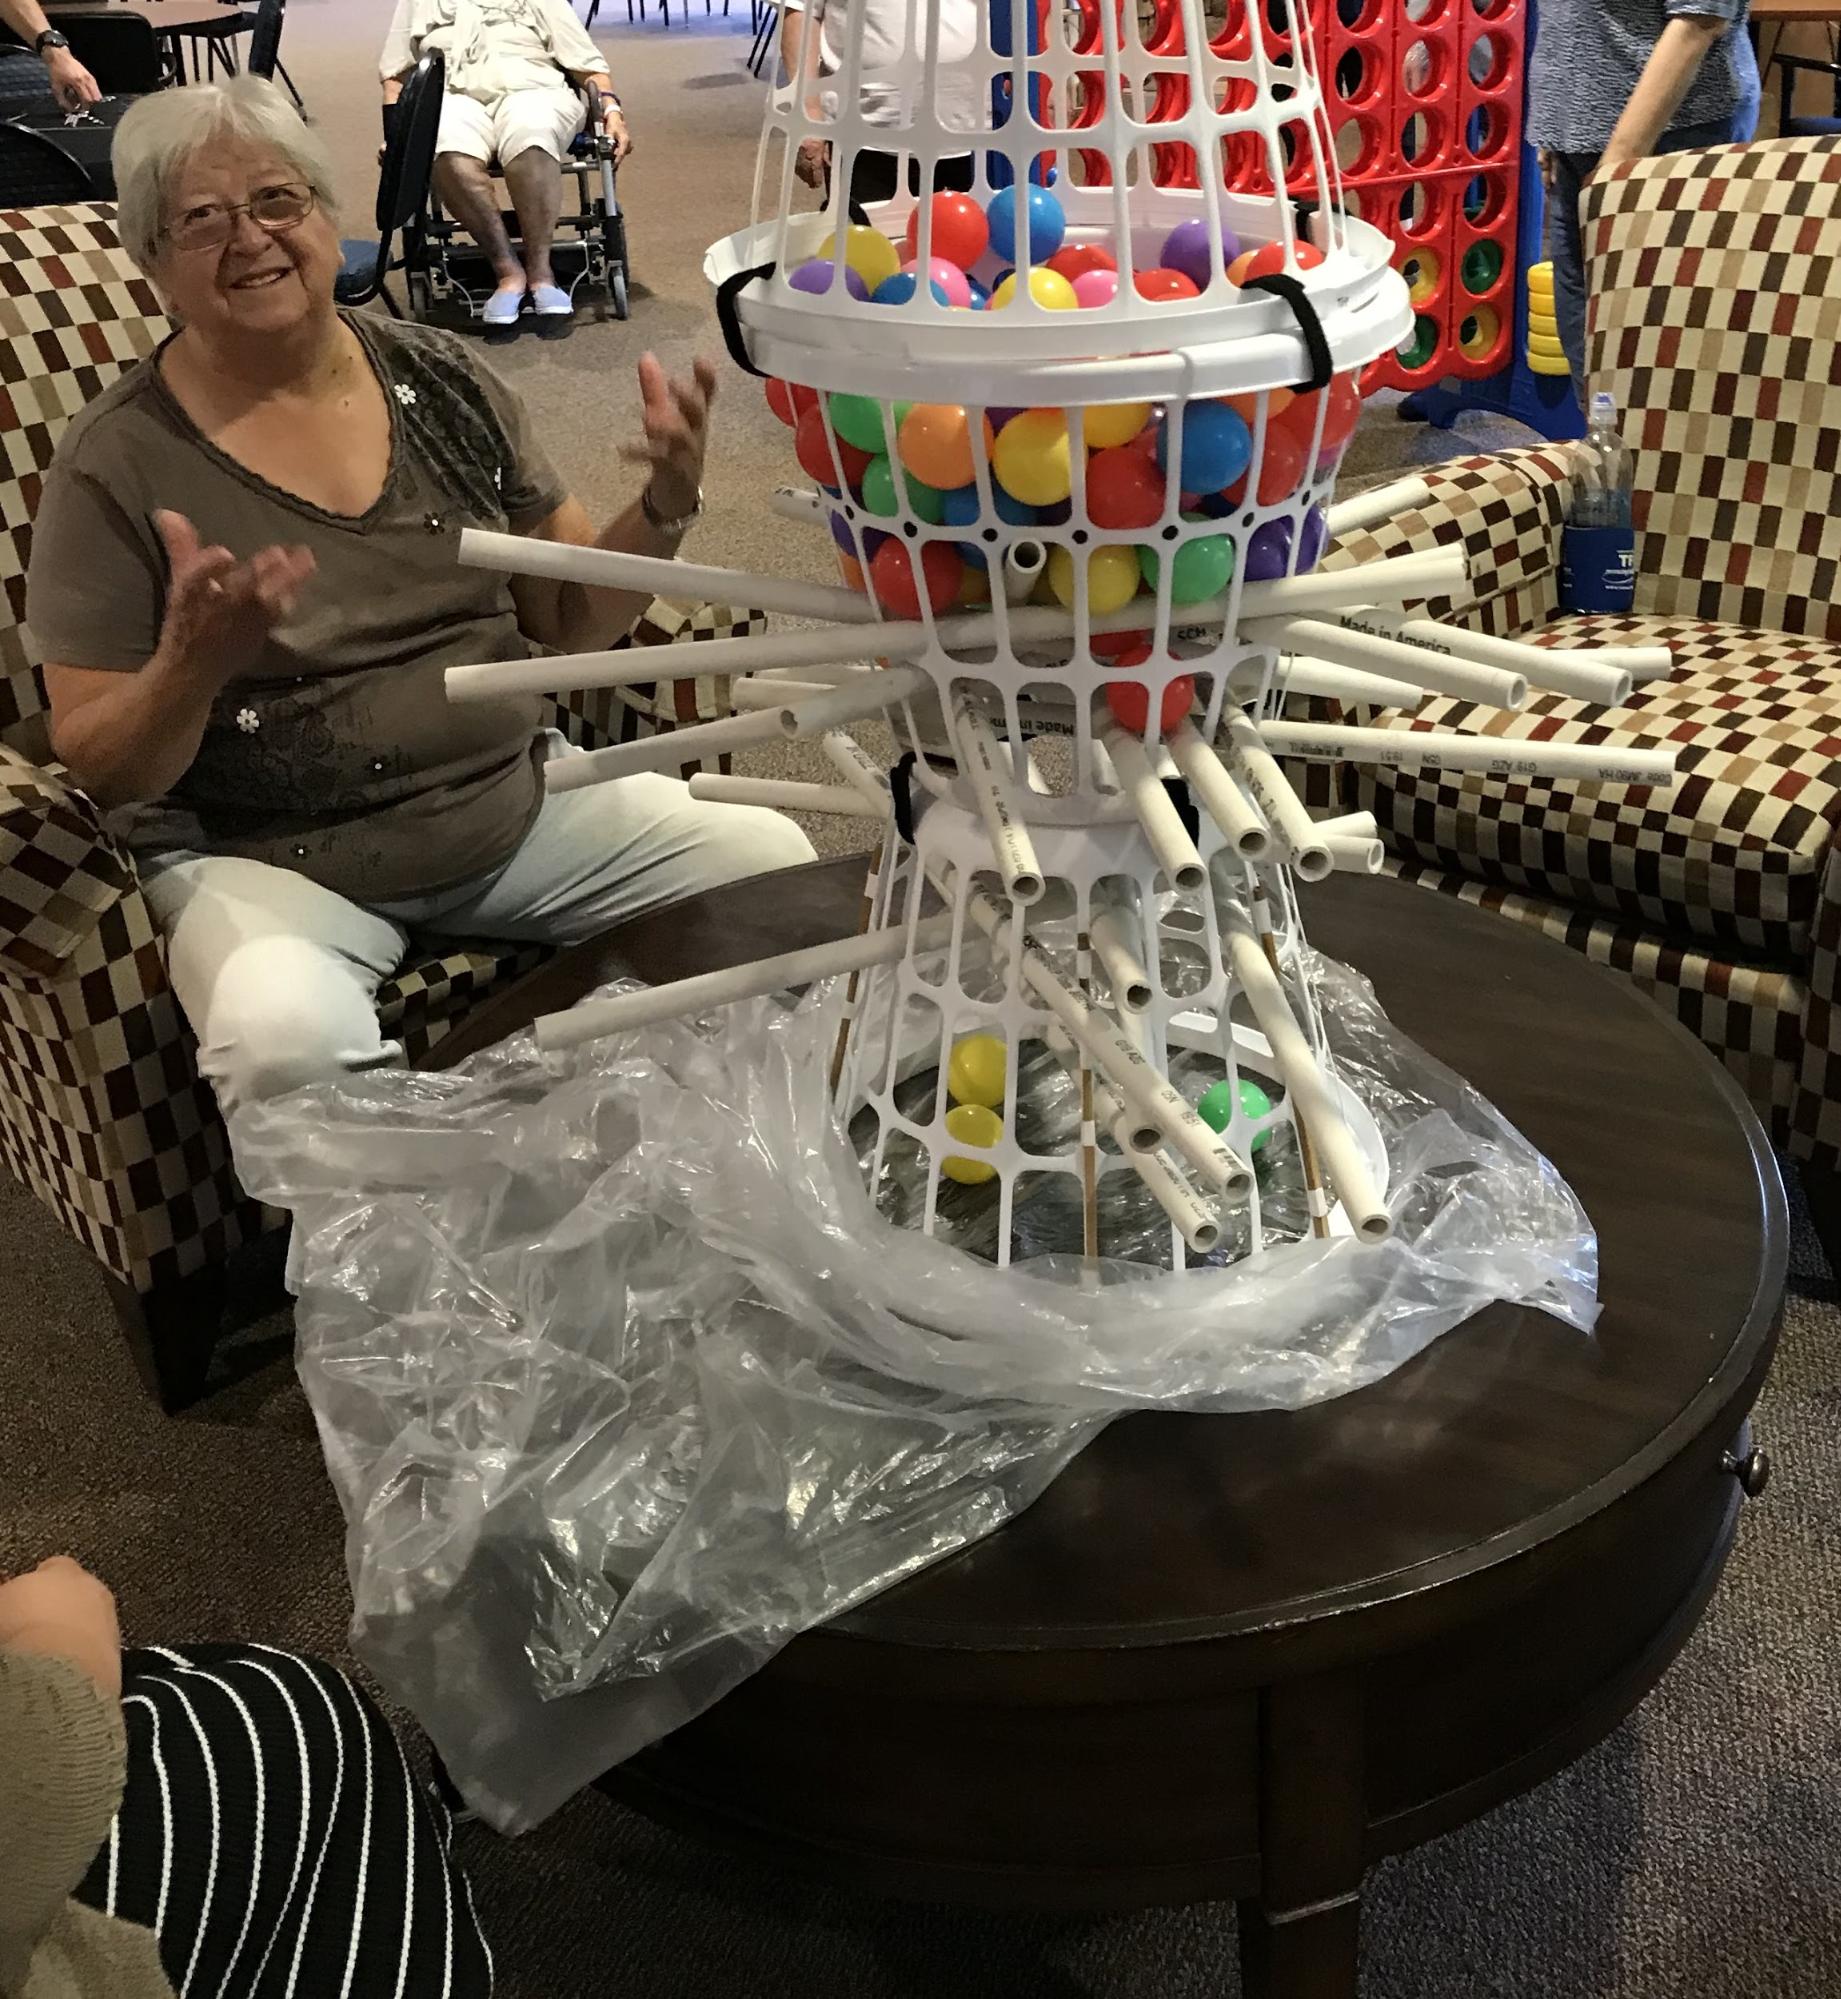 Giant Kerplunk at a community outreach event. 